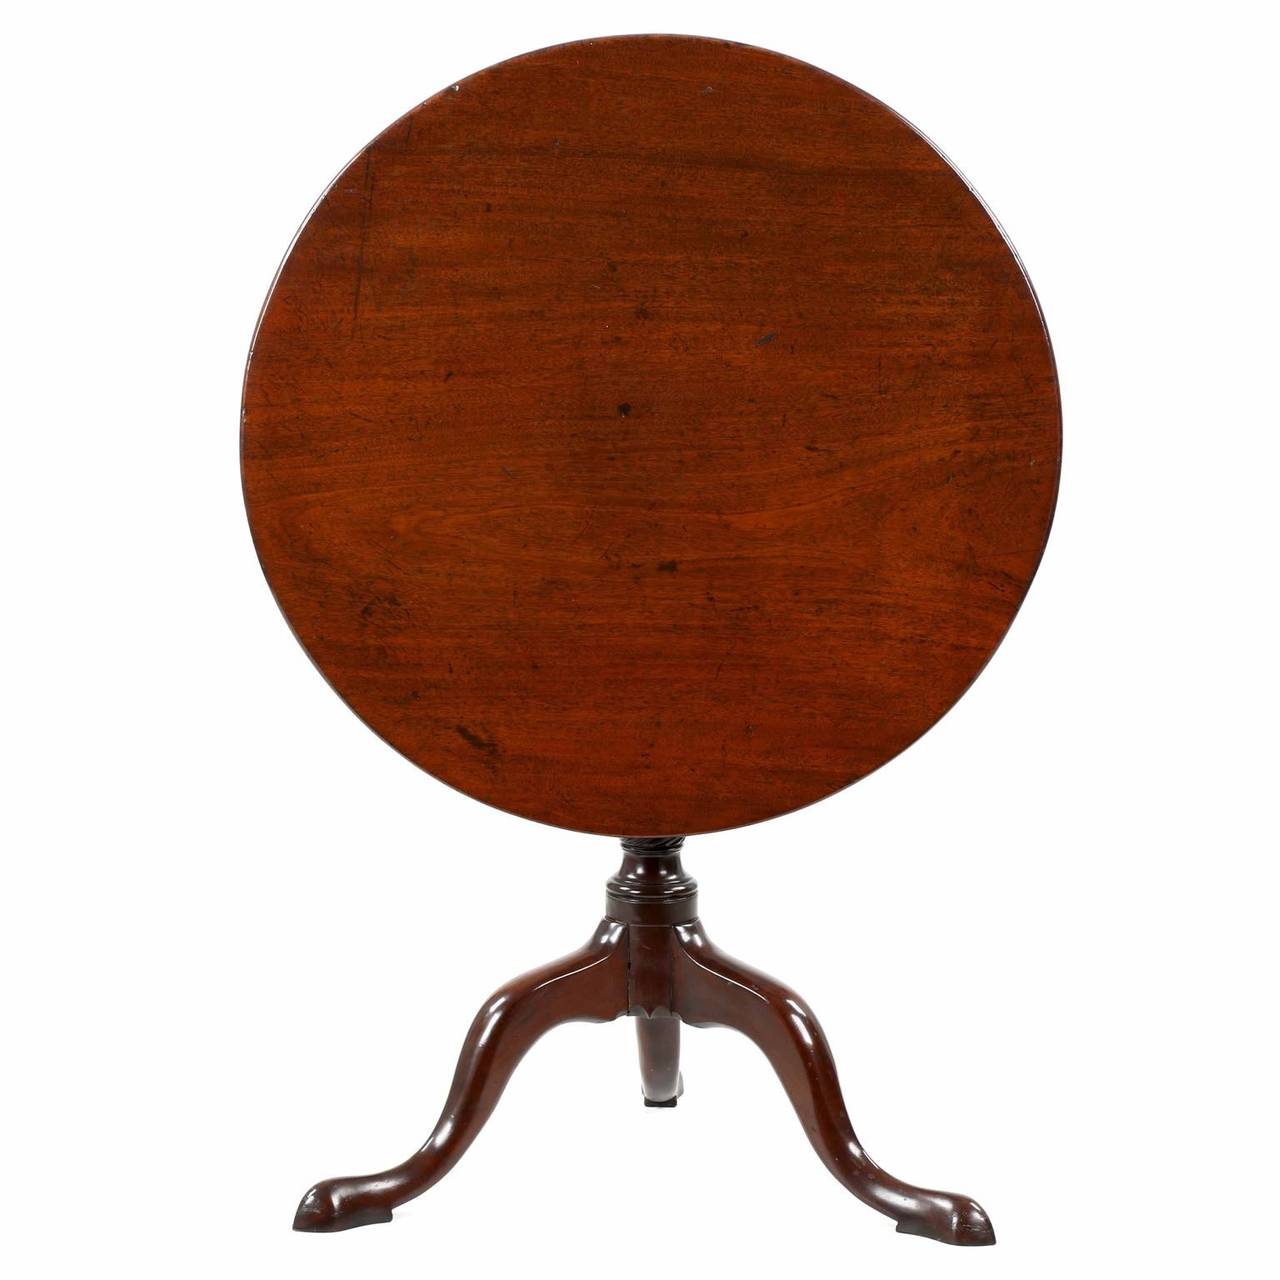 Using generous and very heavy selections of solid mahogany, this very attractive tea table of the George III period is particularly attractive for it's dense and vibrant single board top.  Planed by hand into a perfect round plank with curved edges,